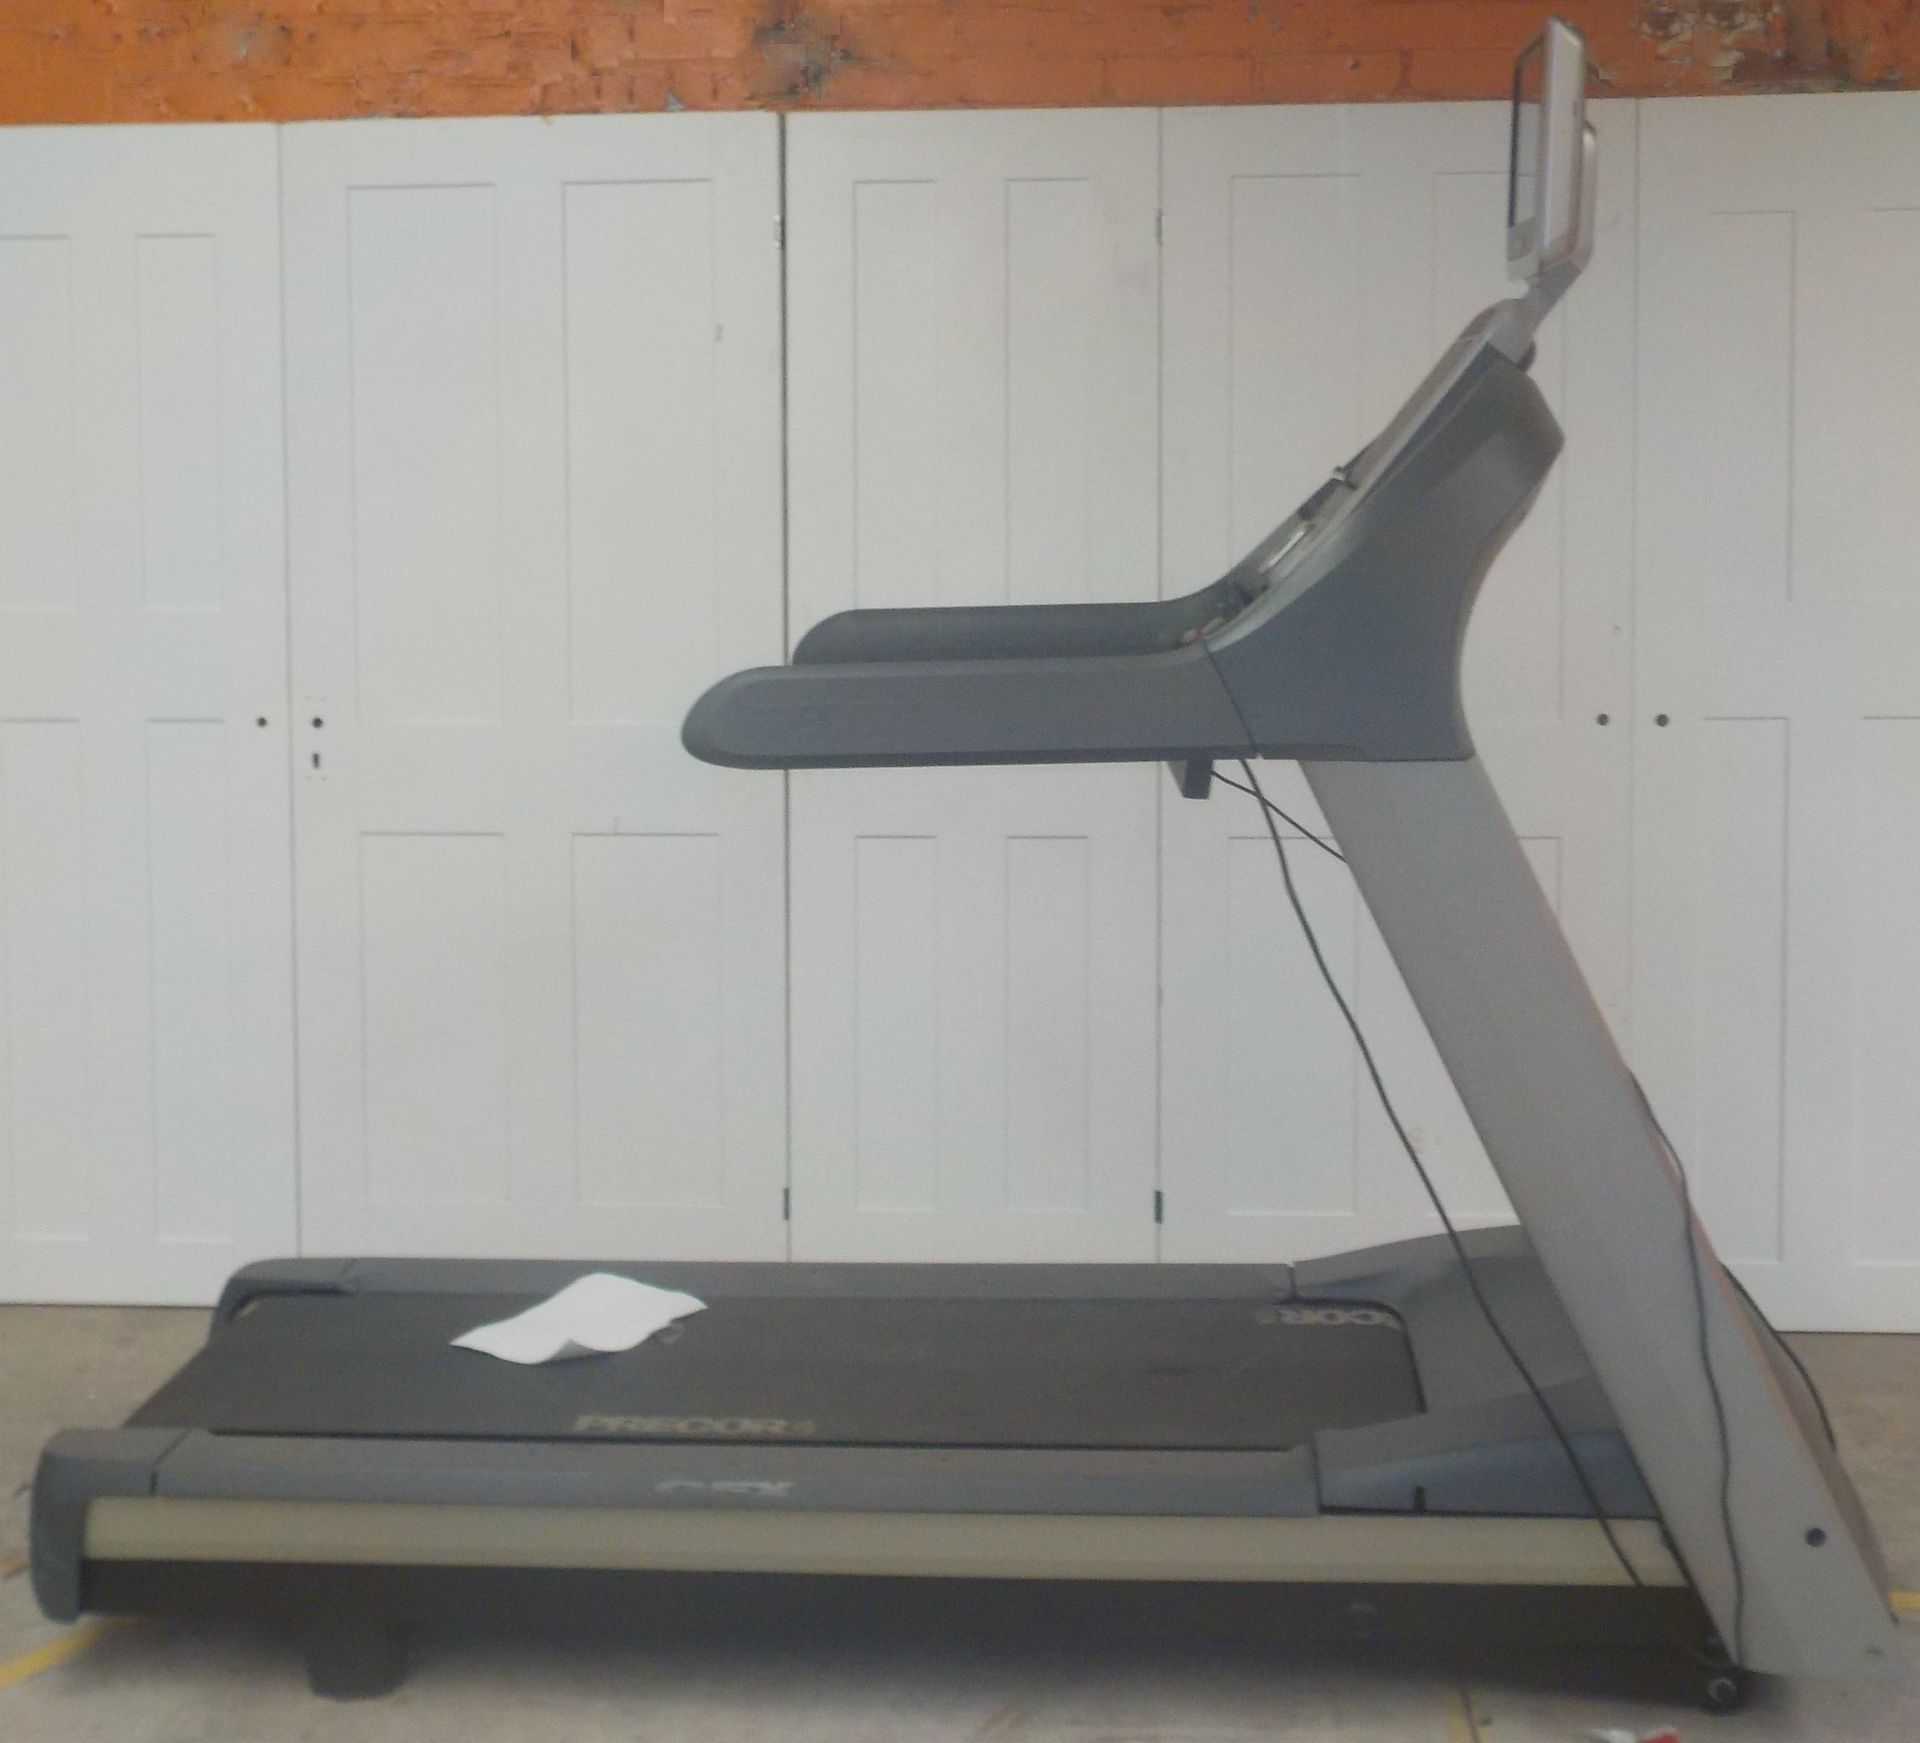 PRECOR TREADMILL - C956i (WITH TV) serial number AMTBK18090021 *PLEASE NOTE - this lot is to be